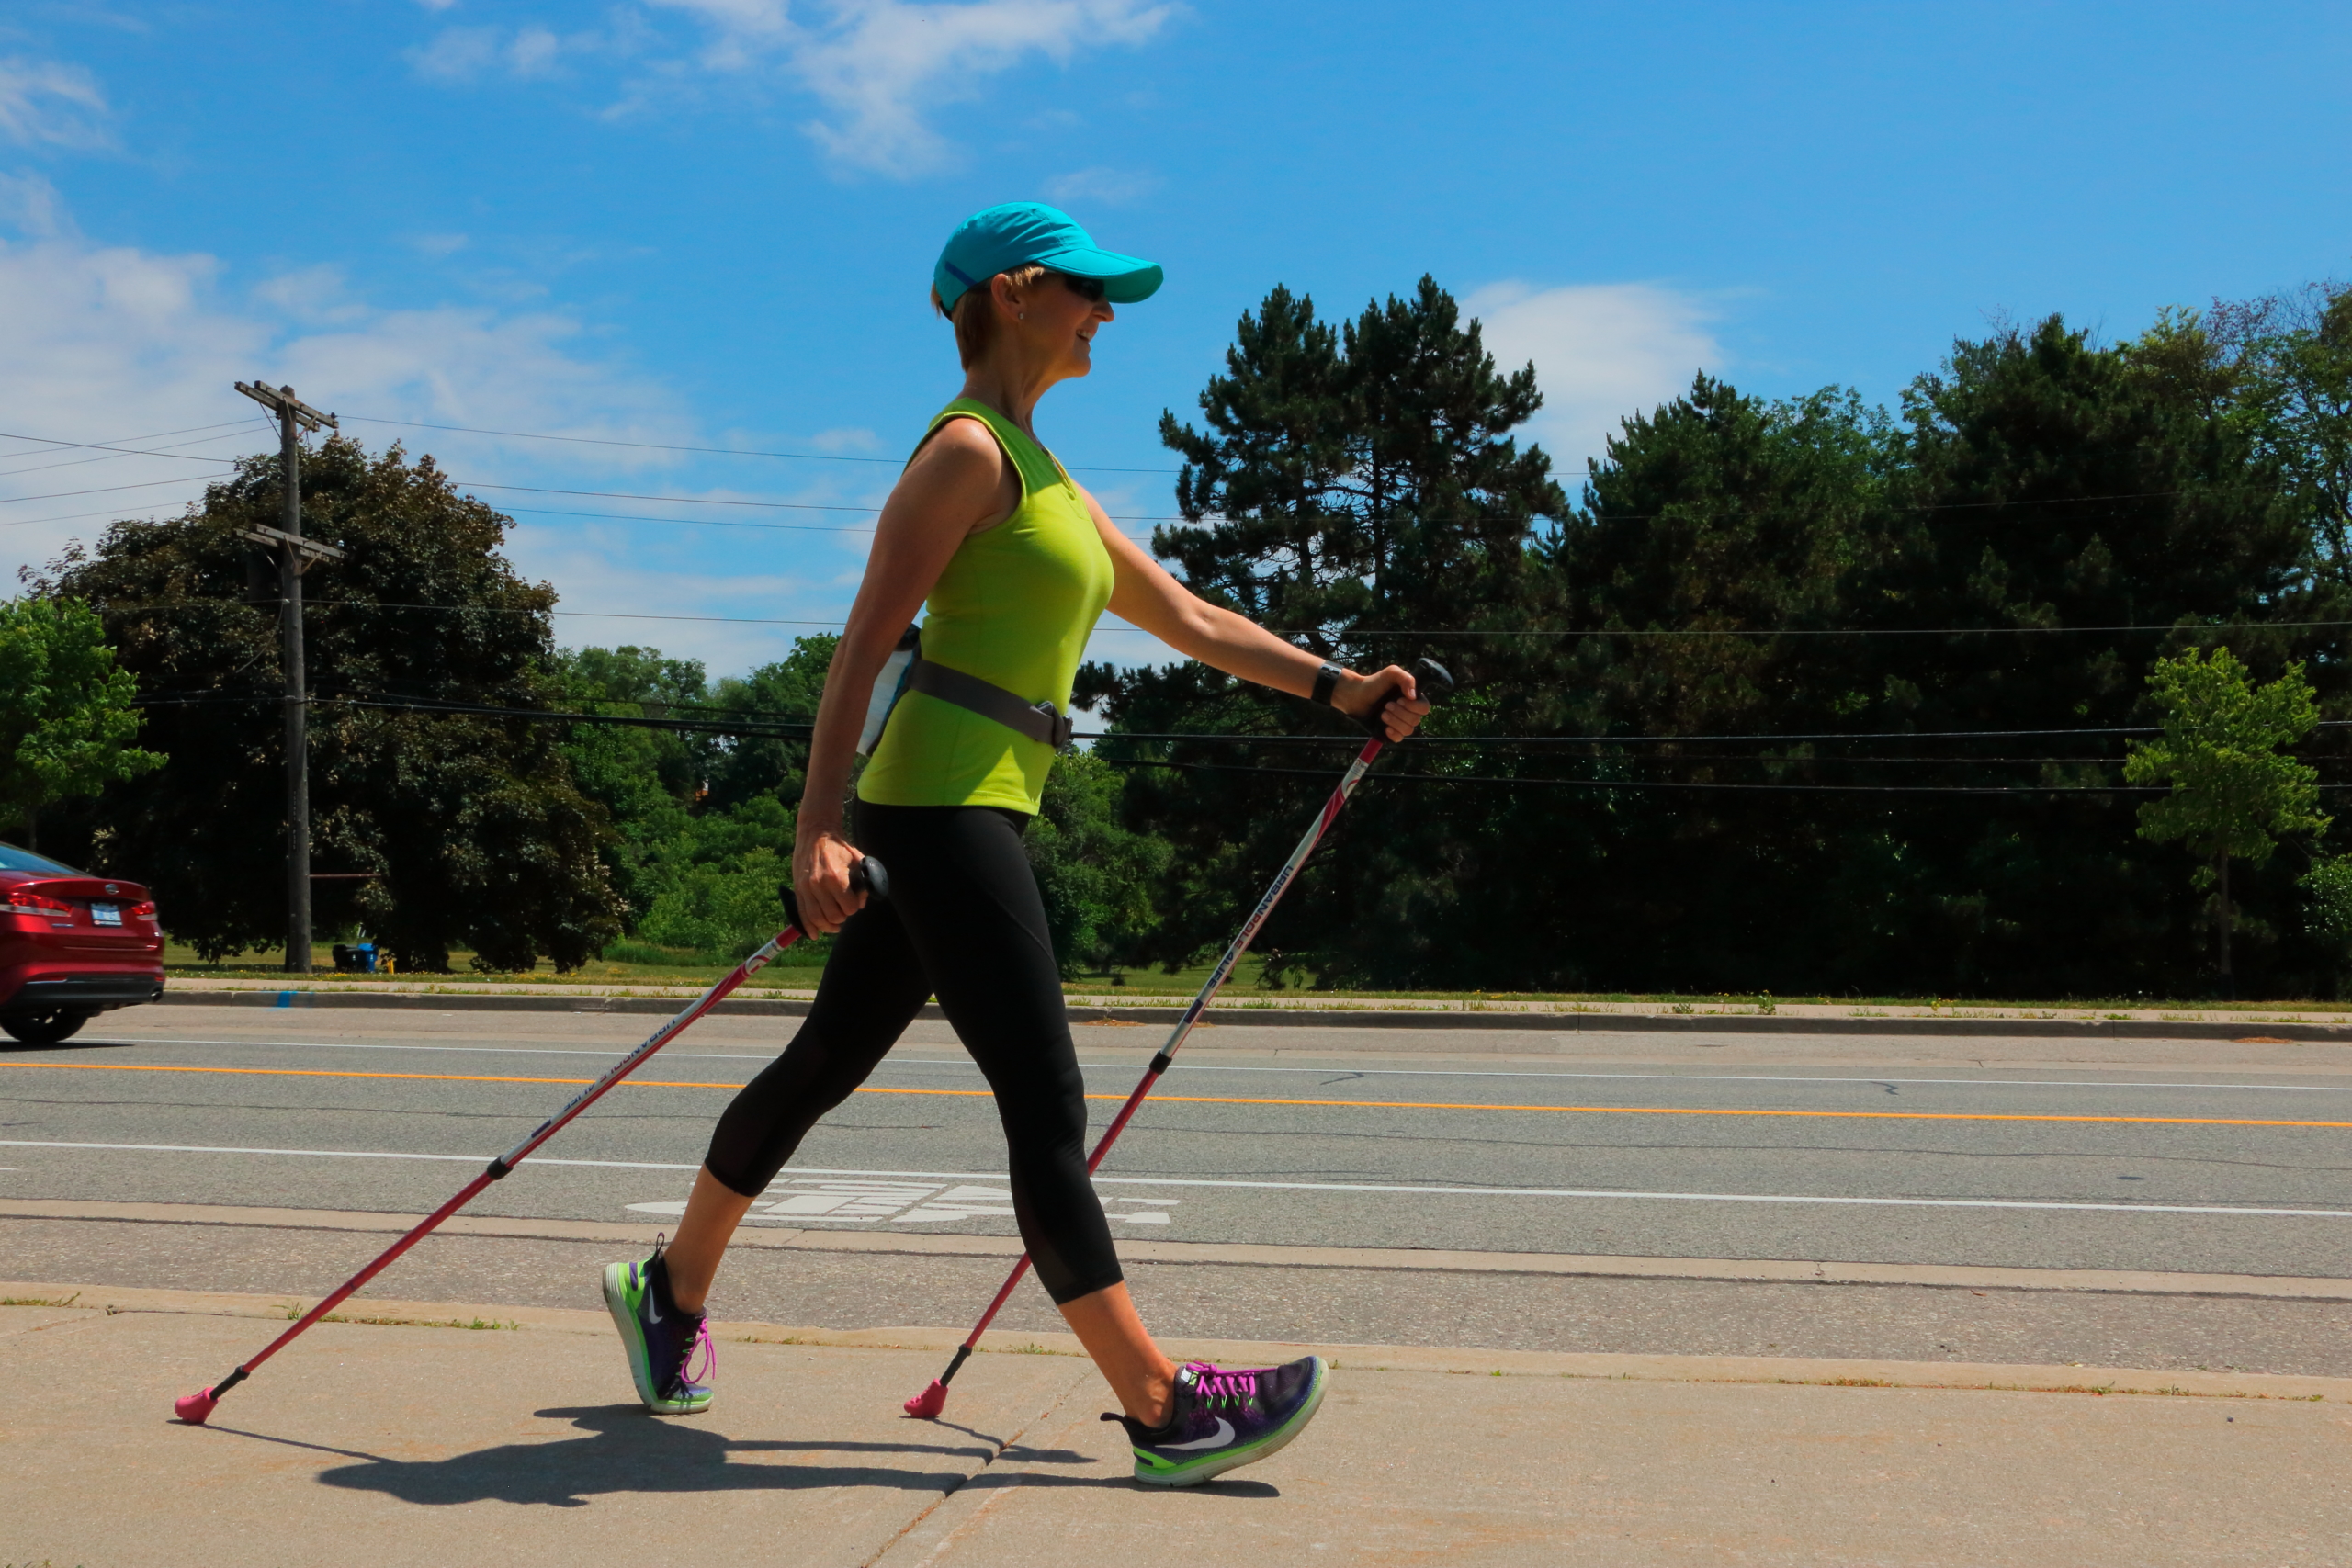 Nordic walking beats interval training for better heart function, study says